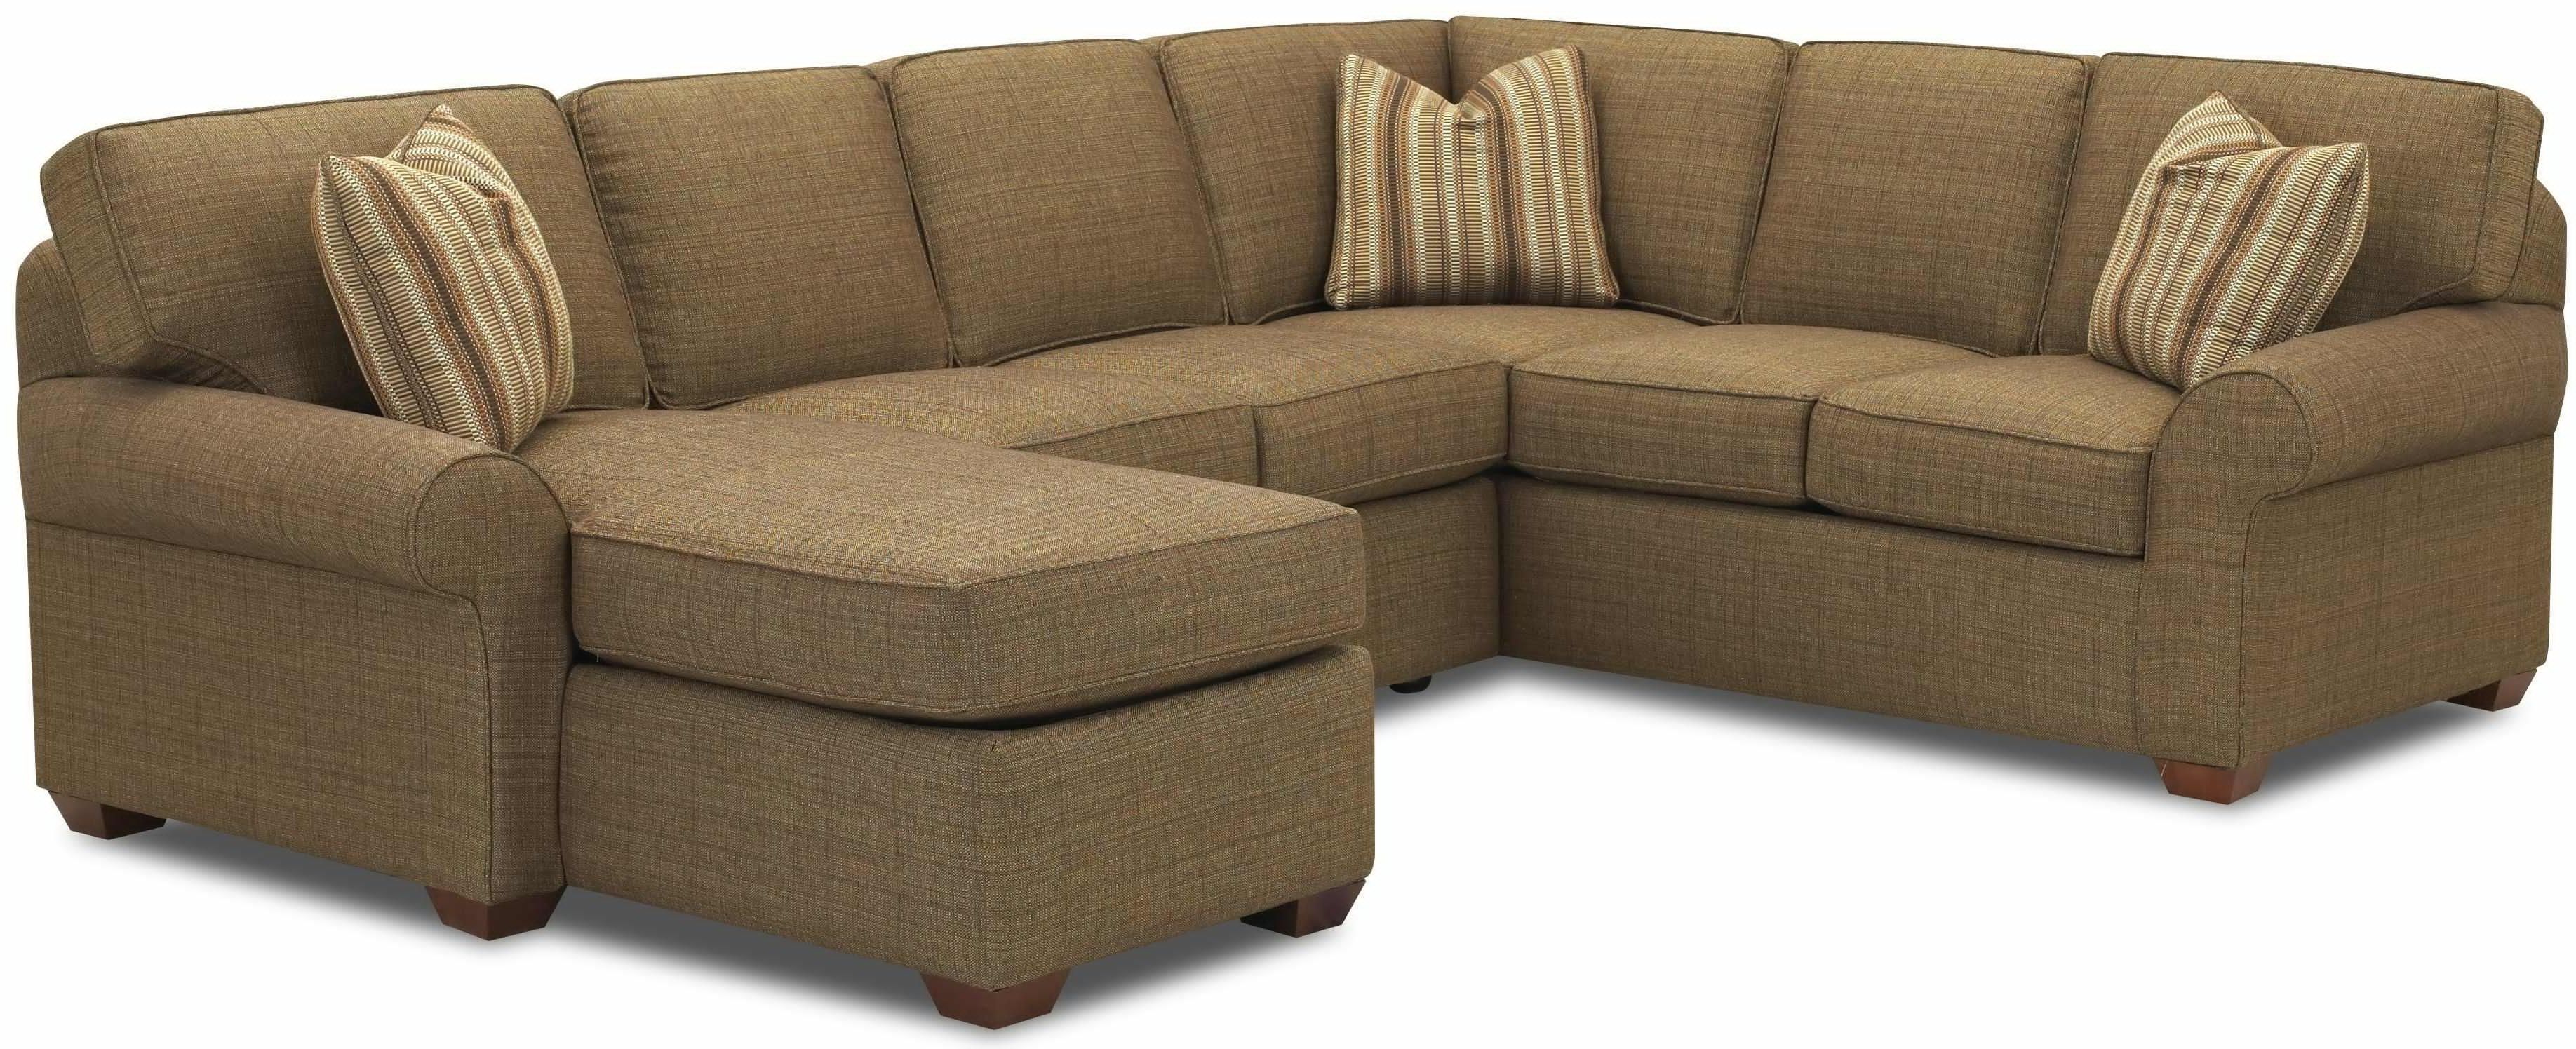 Sectional Sofa Design: Small Sectional Sofa With Chaise Lounge With Preferred Chaise Lounge Sectionals (View 9 of 15)